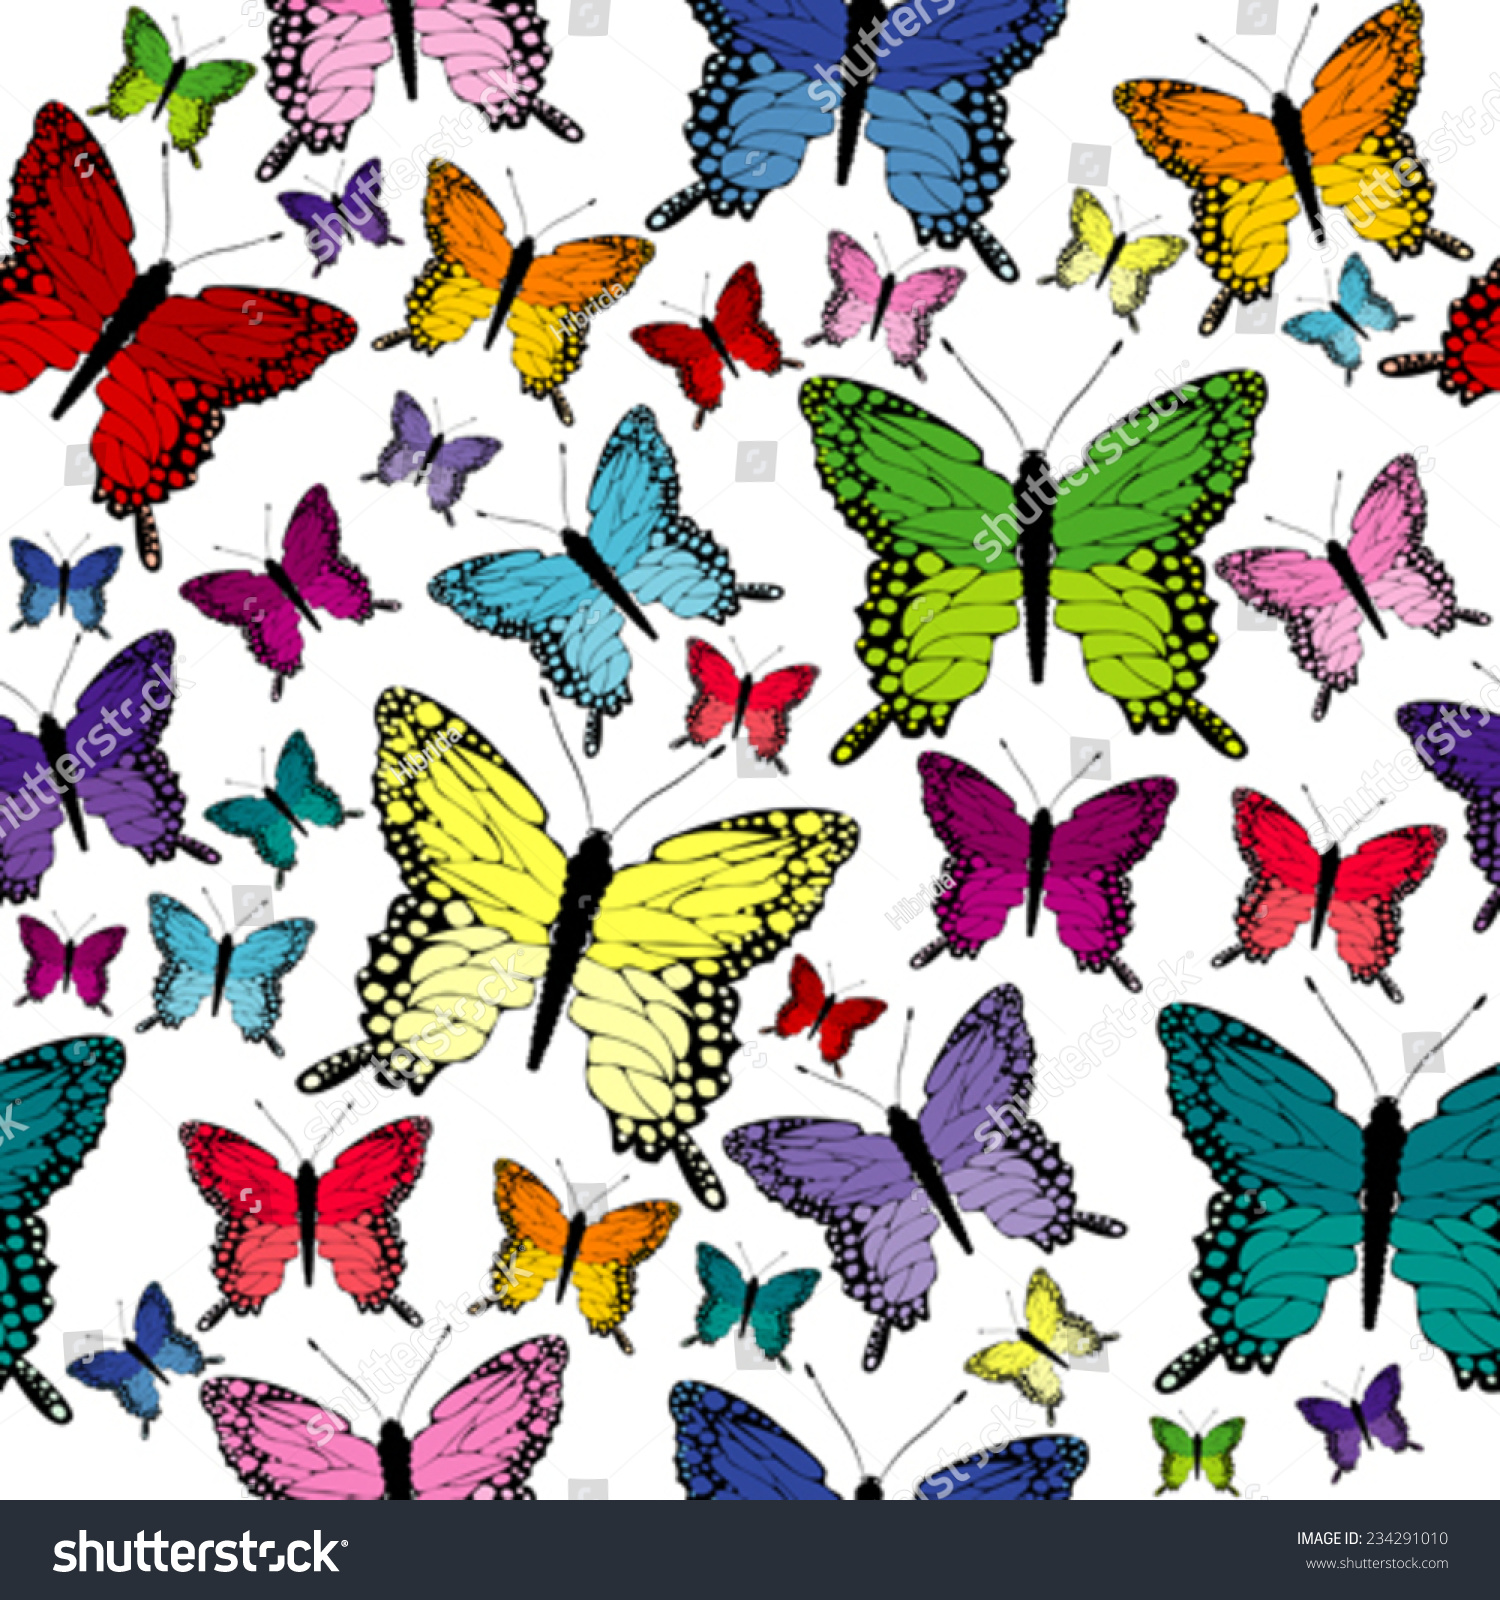 Colorful Seamless With Butterflies Stock Vector 234291010 : Shutterstock